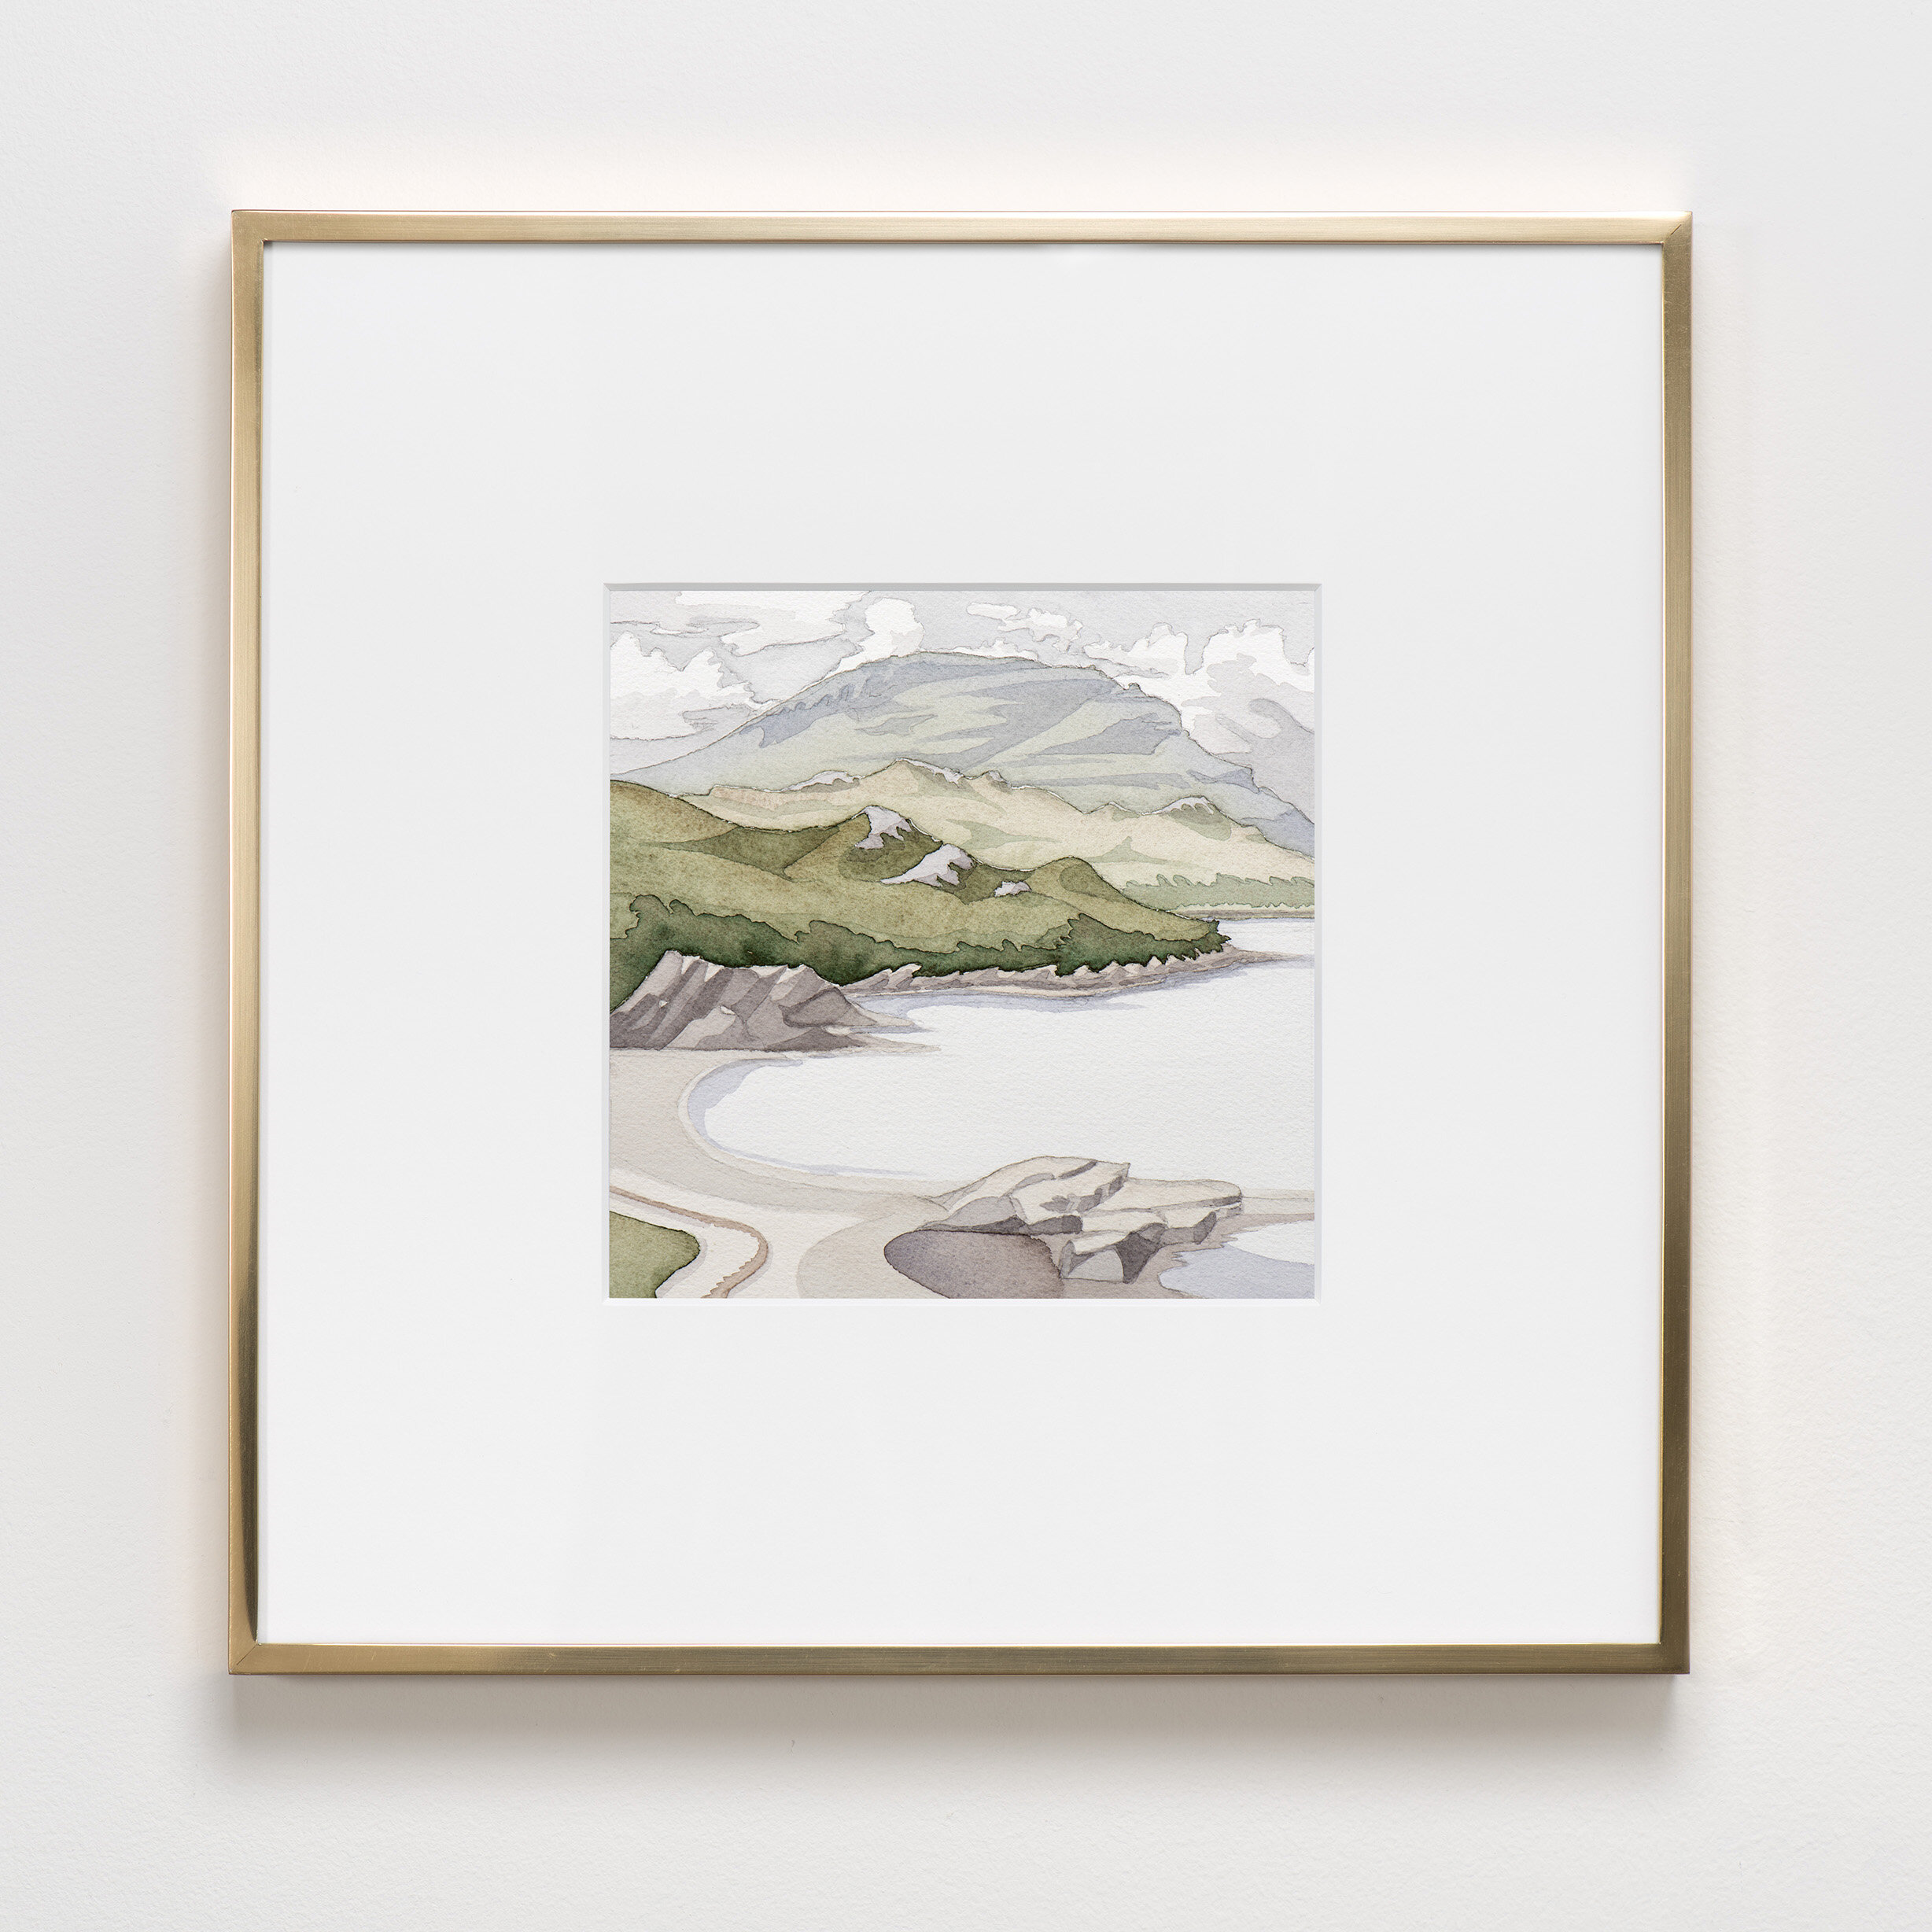   Shieldaig , 2019 Watercolor on paper 16 1/4 x 16 1/4 x 1 1/4 inches (framed) 